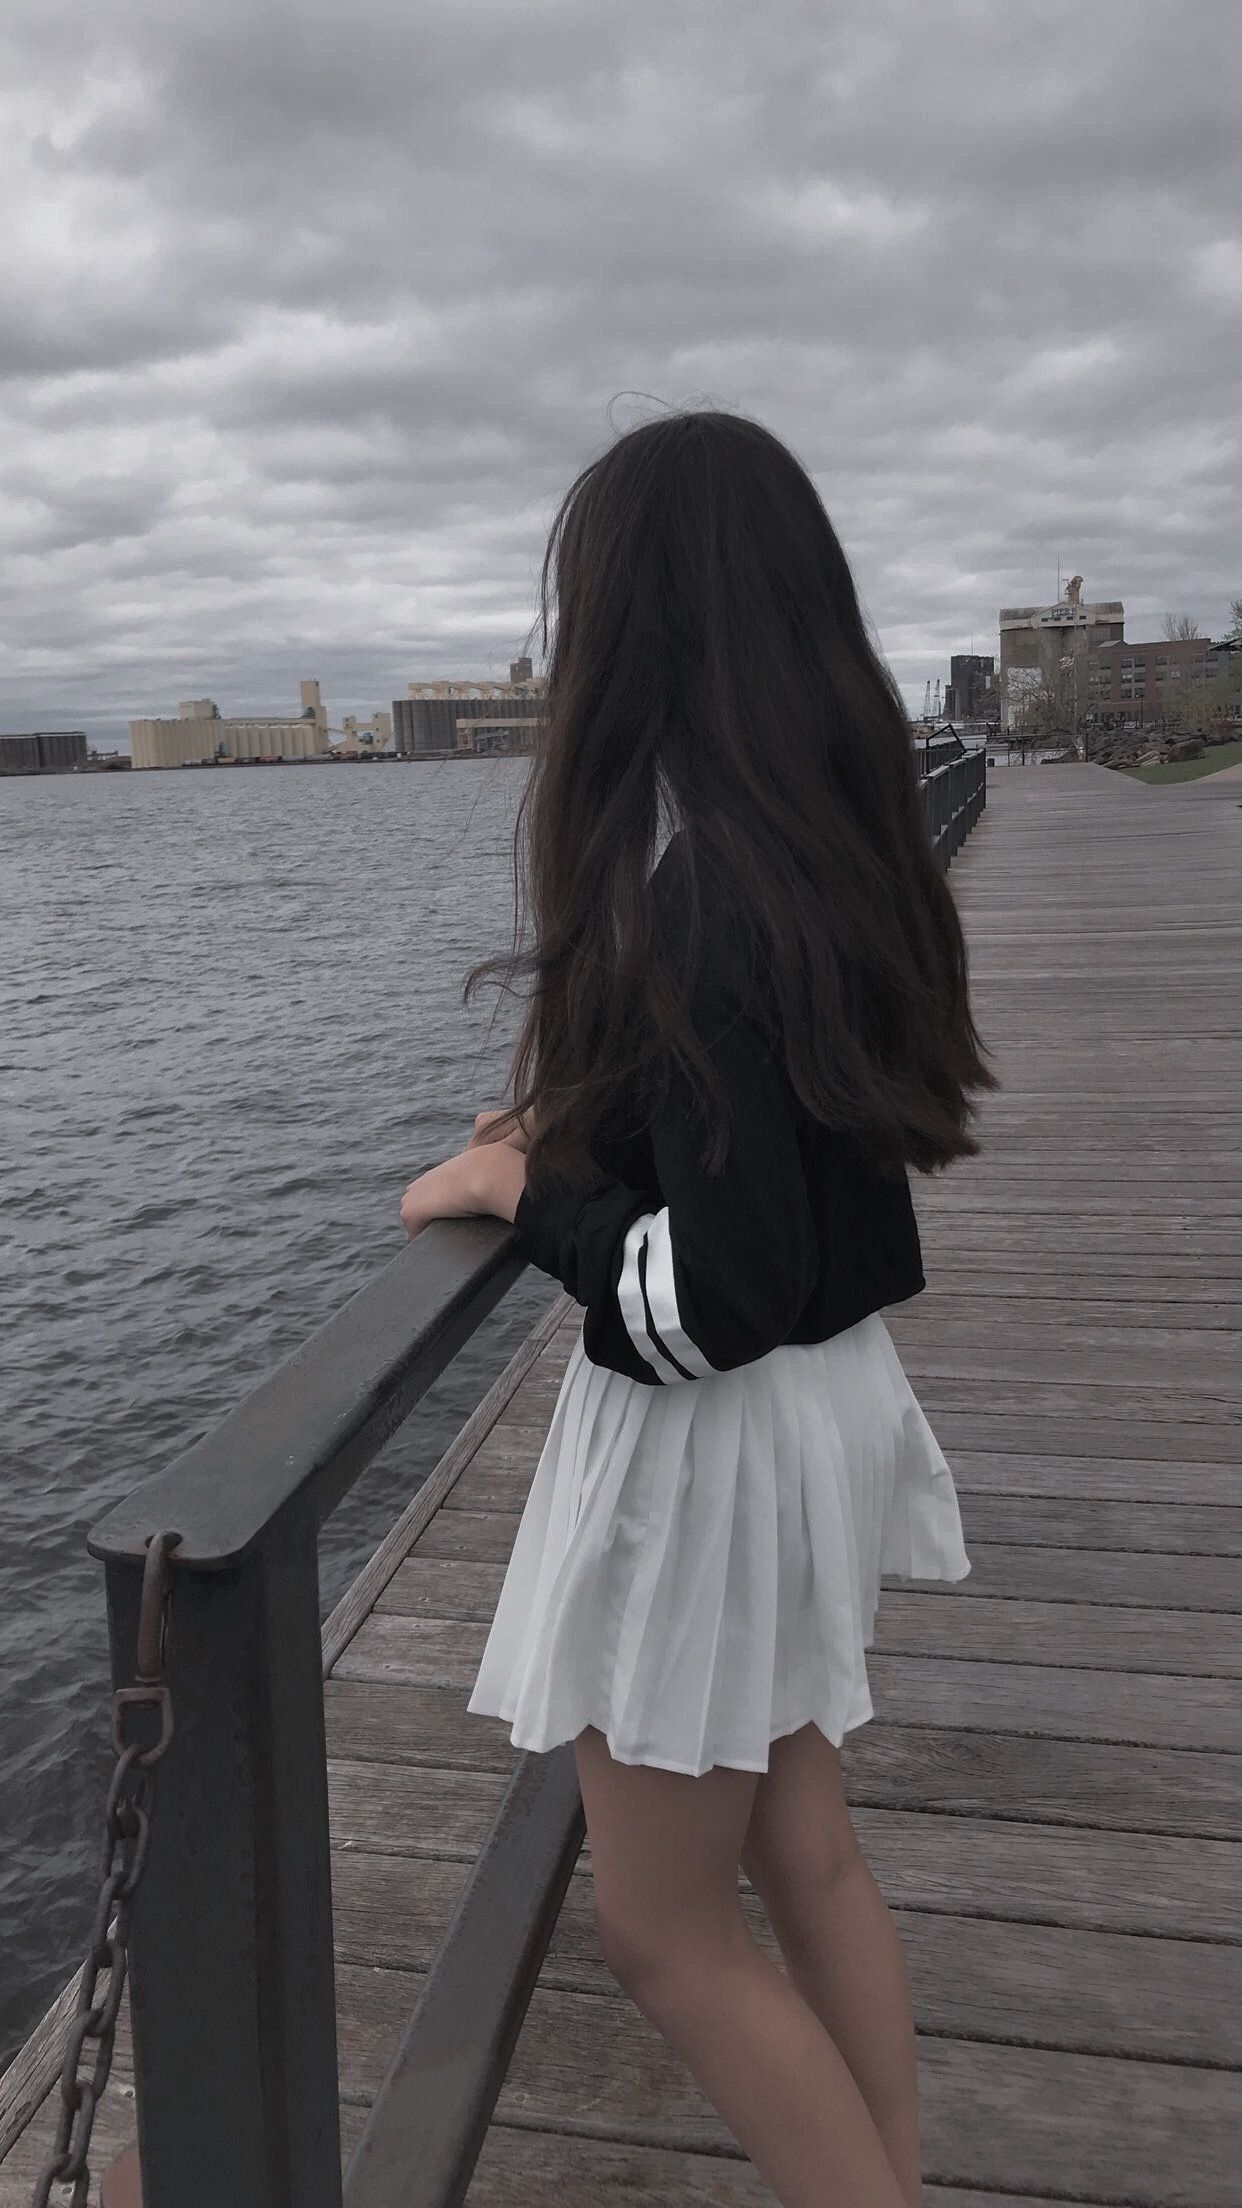 A woman with long black hair wearing a black and white jacket and a white skirt stands on a dock - Korean